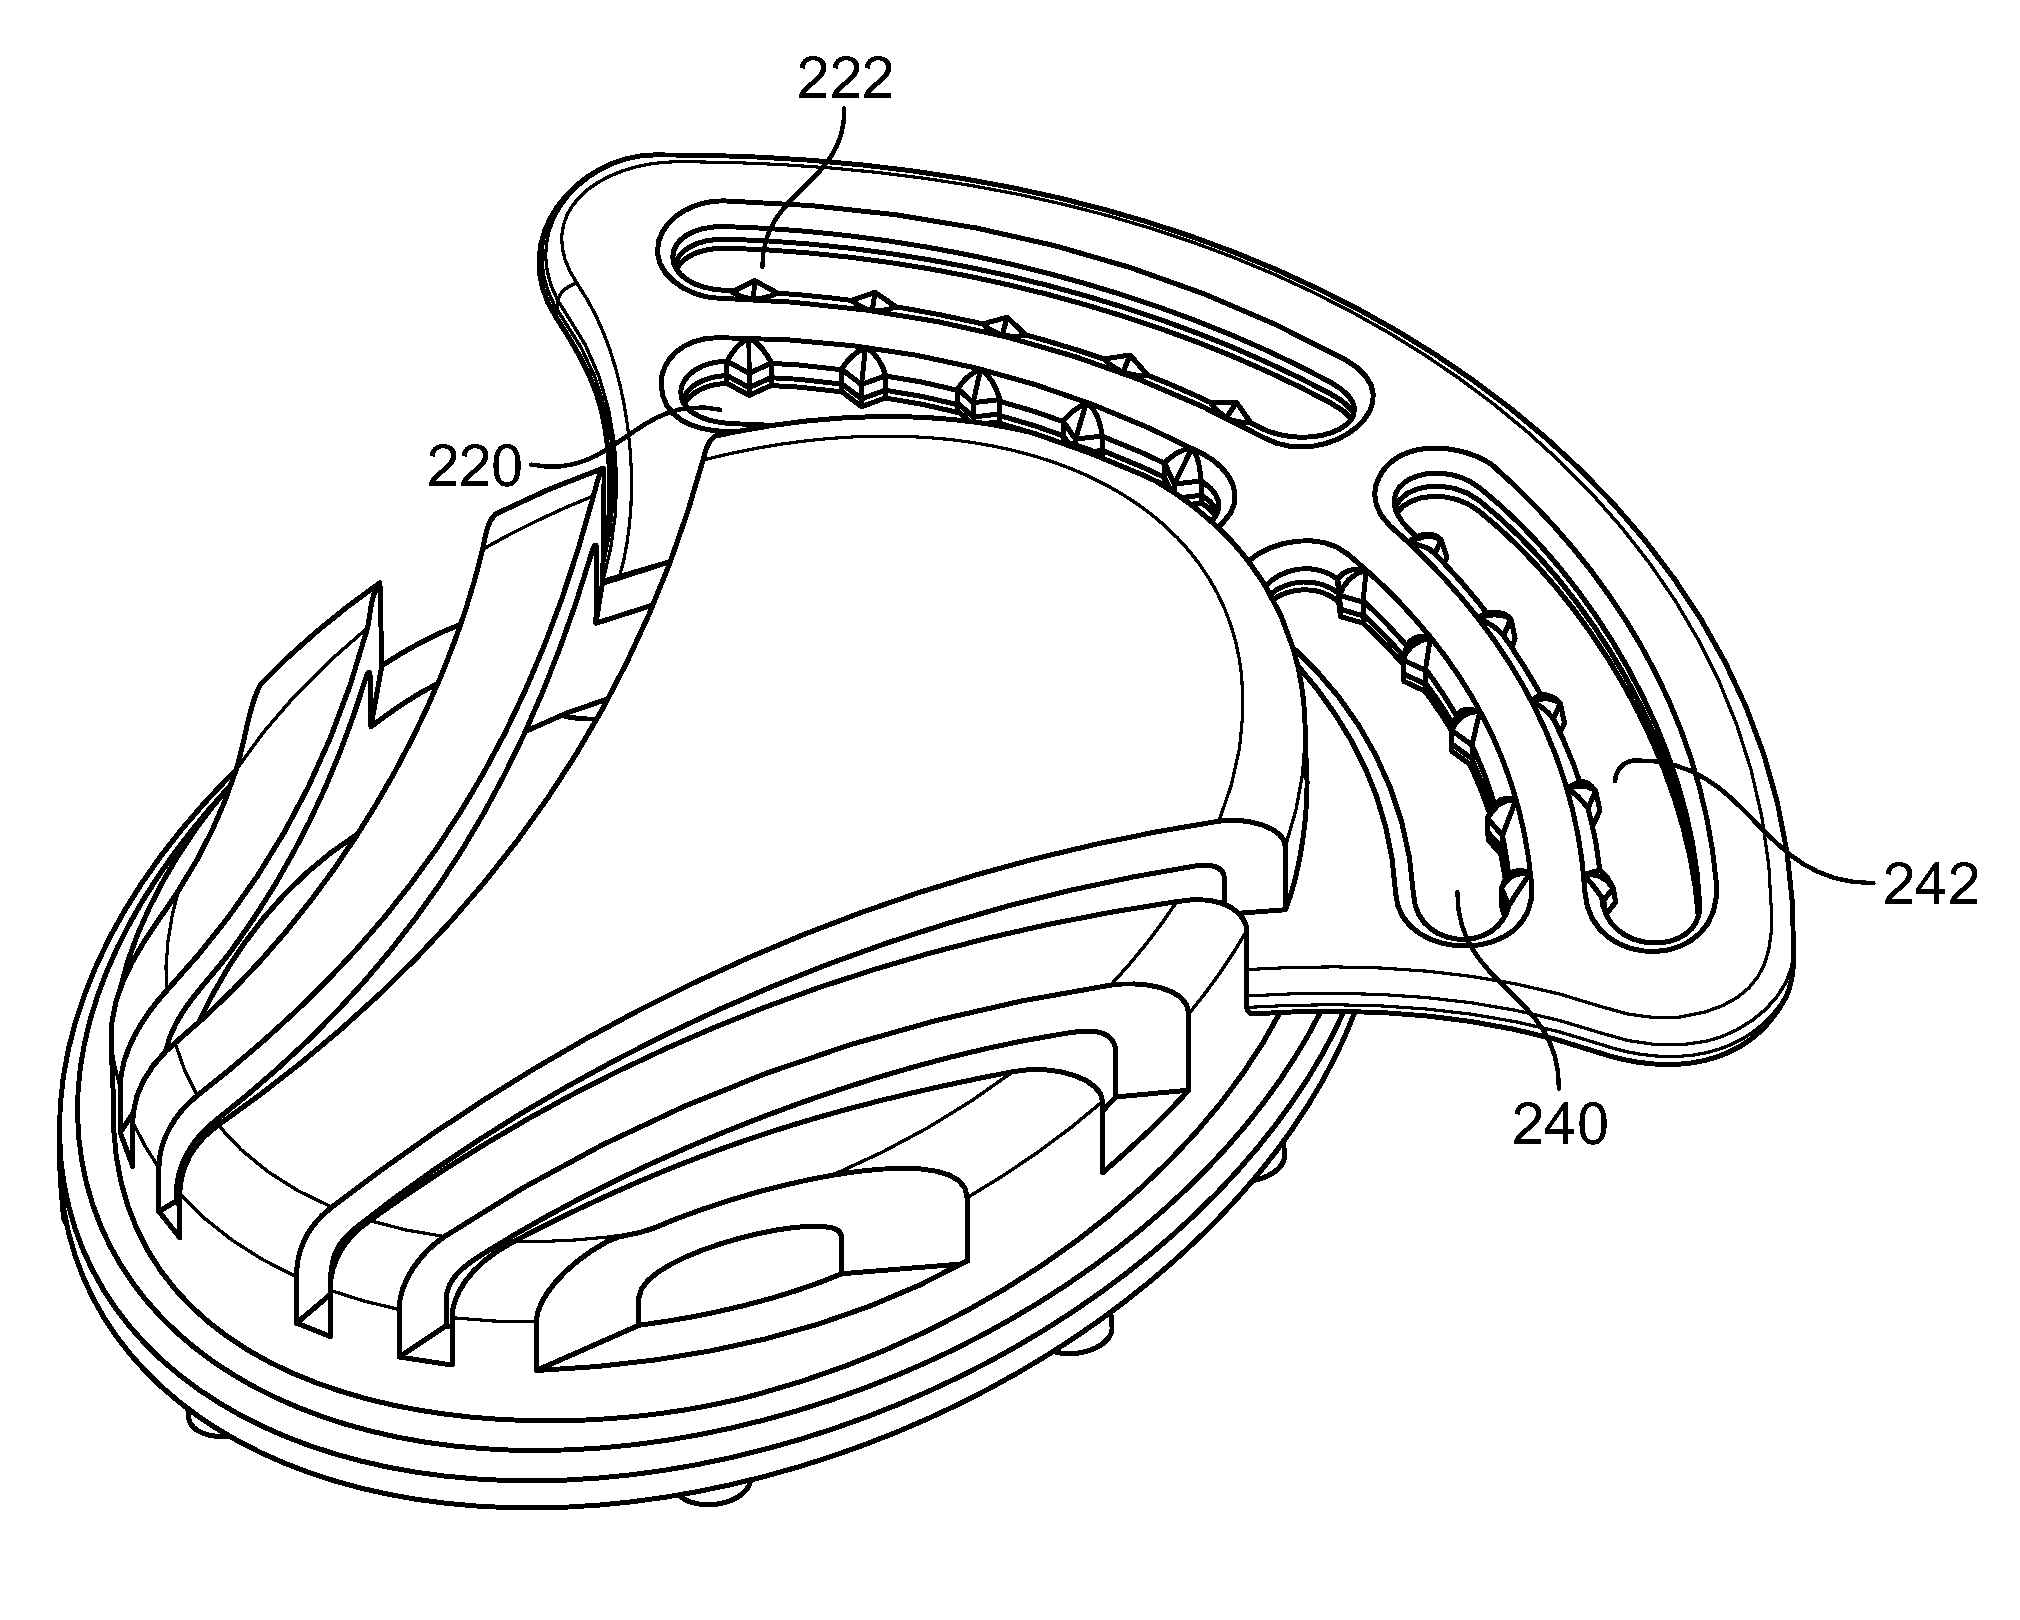 Vent and strap fastening system for a disposable respirator providing improved donning